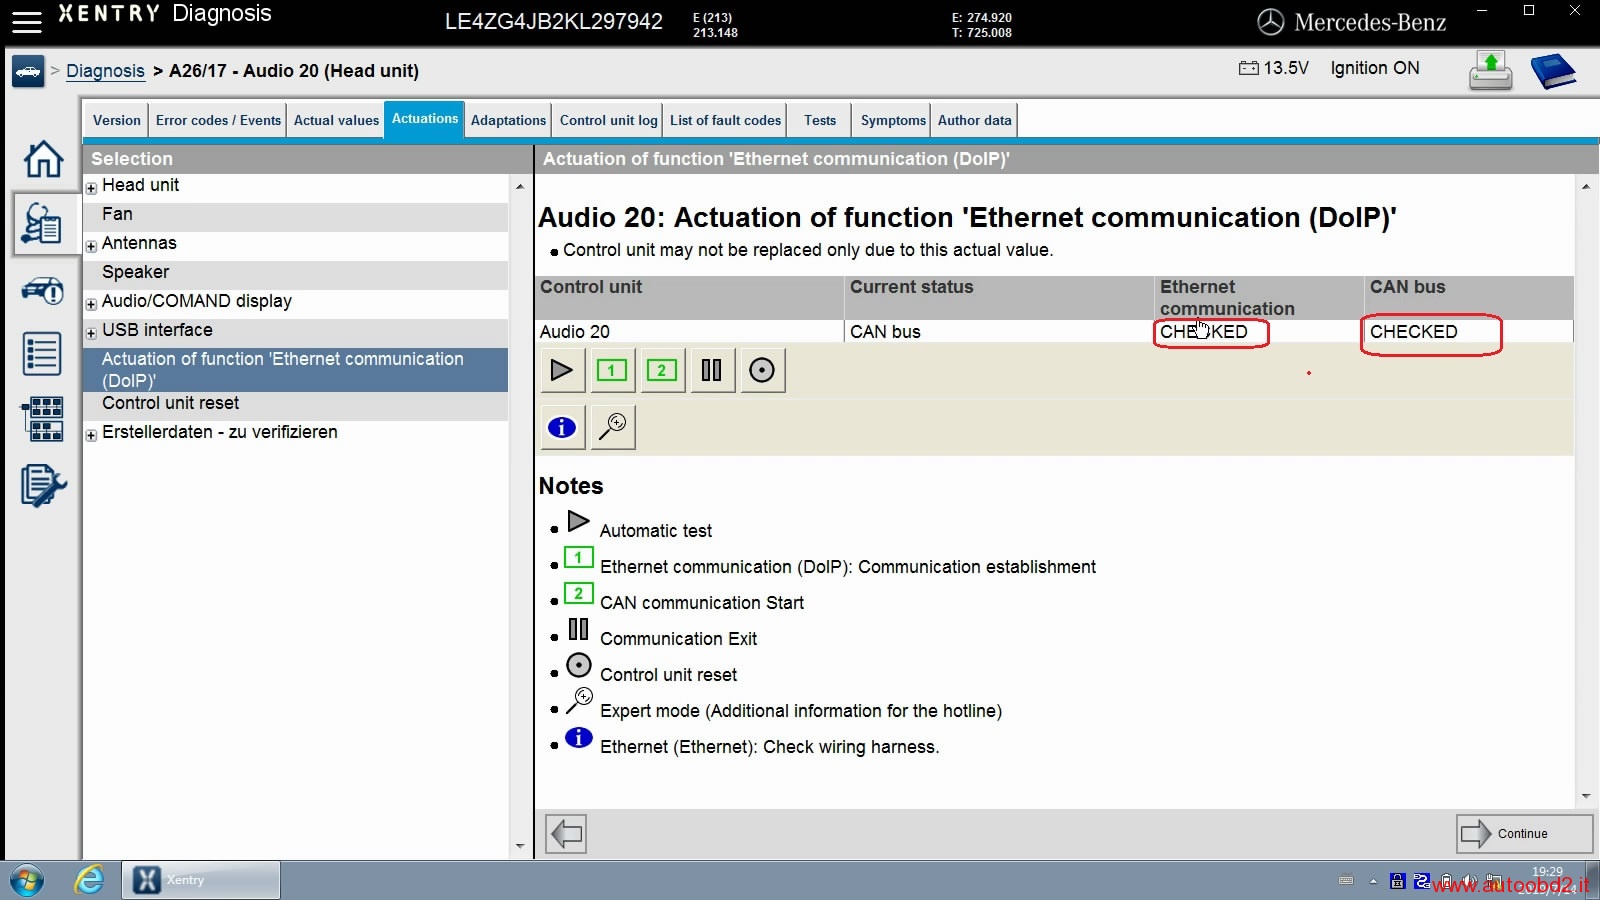 sdc4-plus-xentry-test-actuation-of-function-ethernet-communication-doip-18